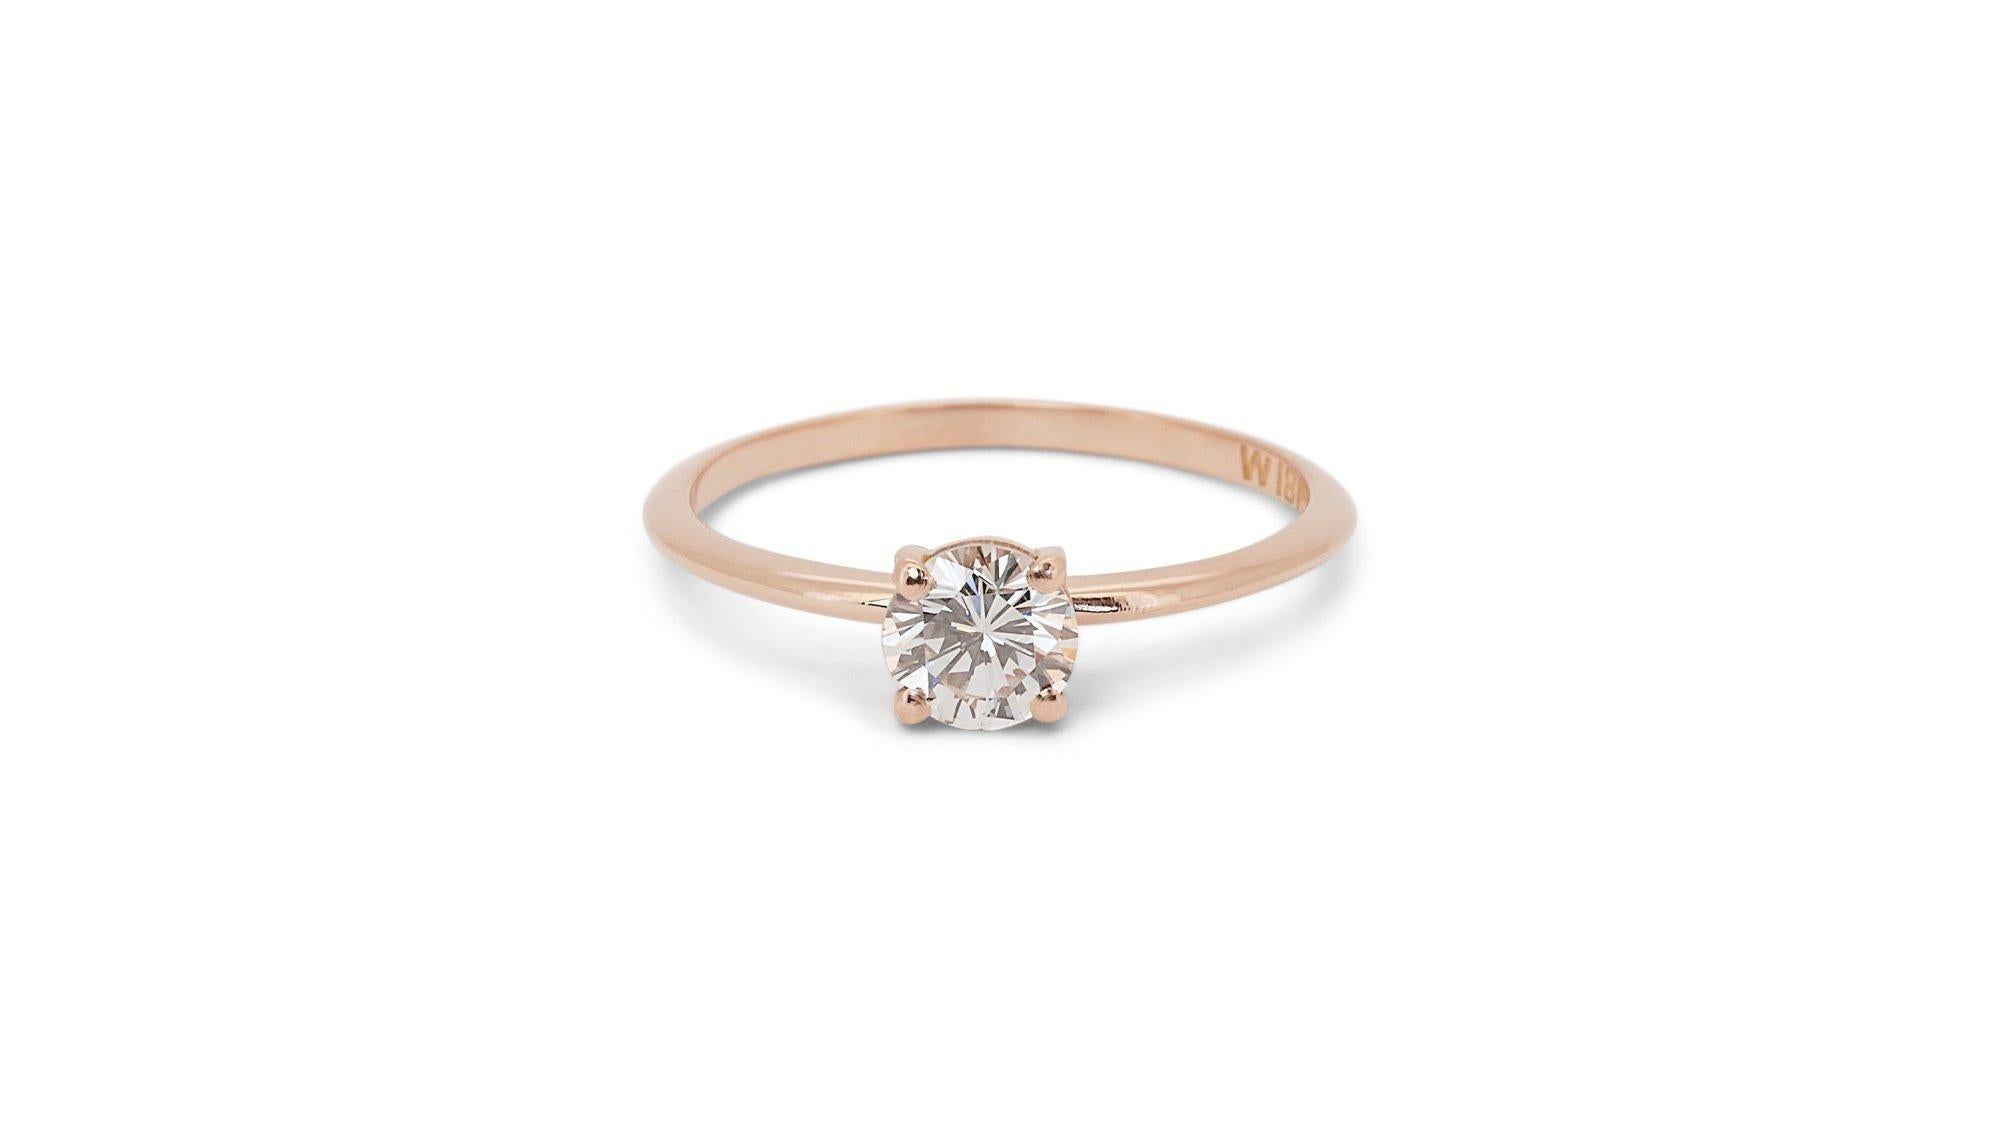 Timeless 0,80ct Diamond Solitaire Ring in 18k Rose Gold - GIA zertifiziert im Angebot 3